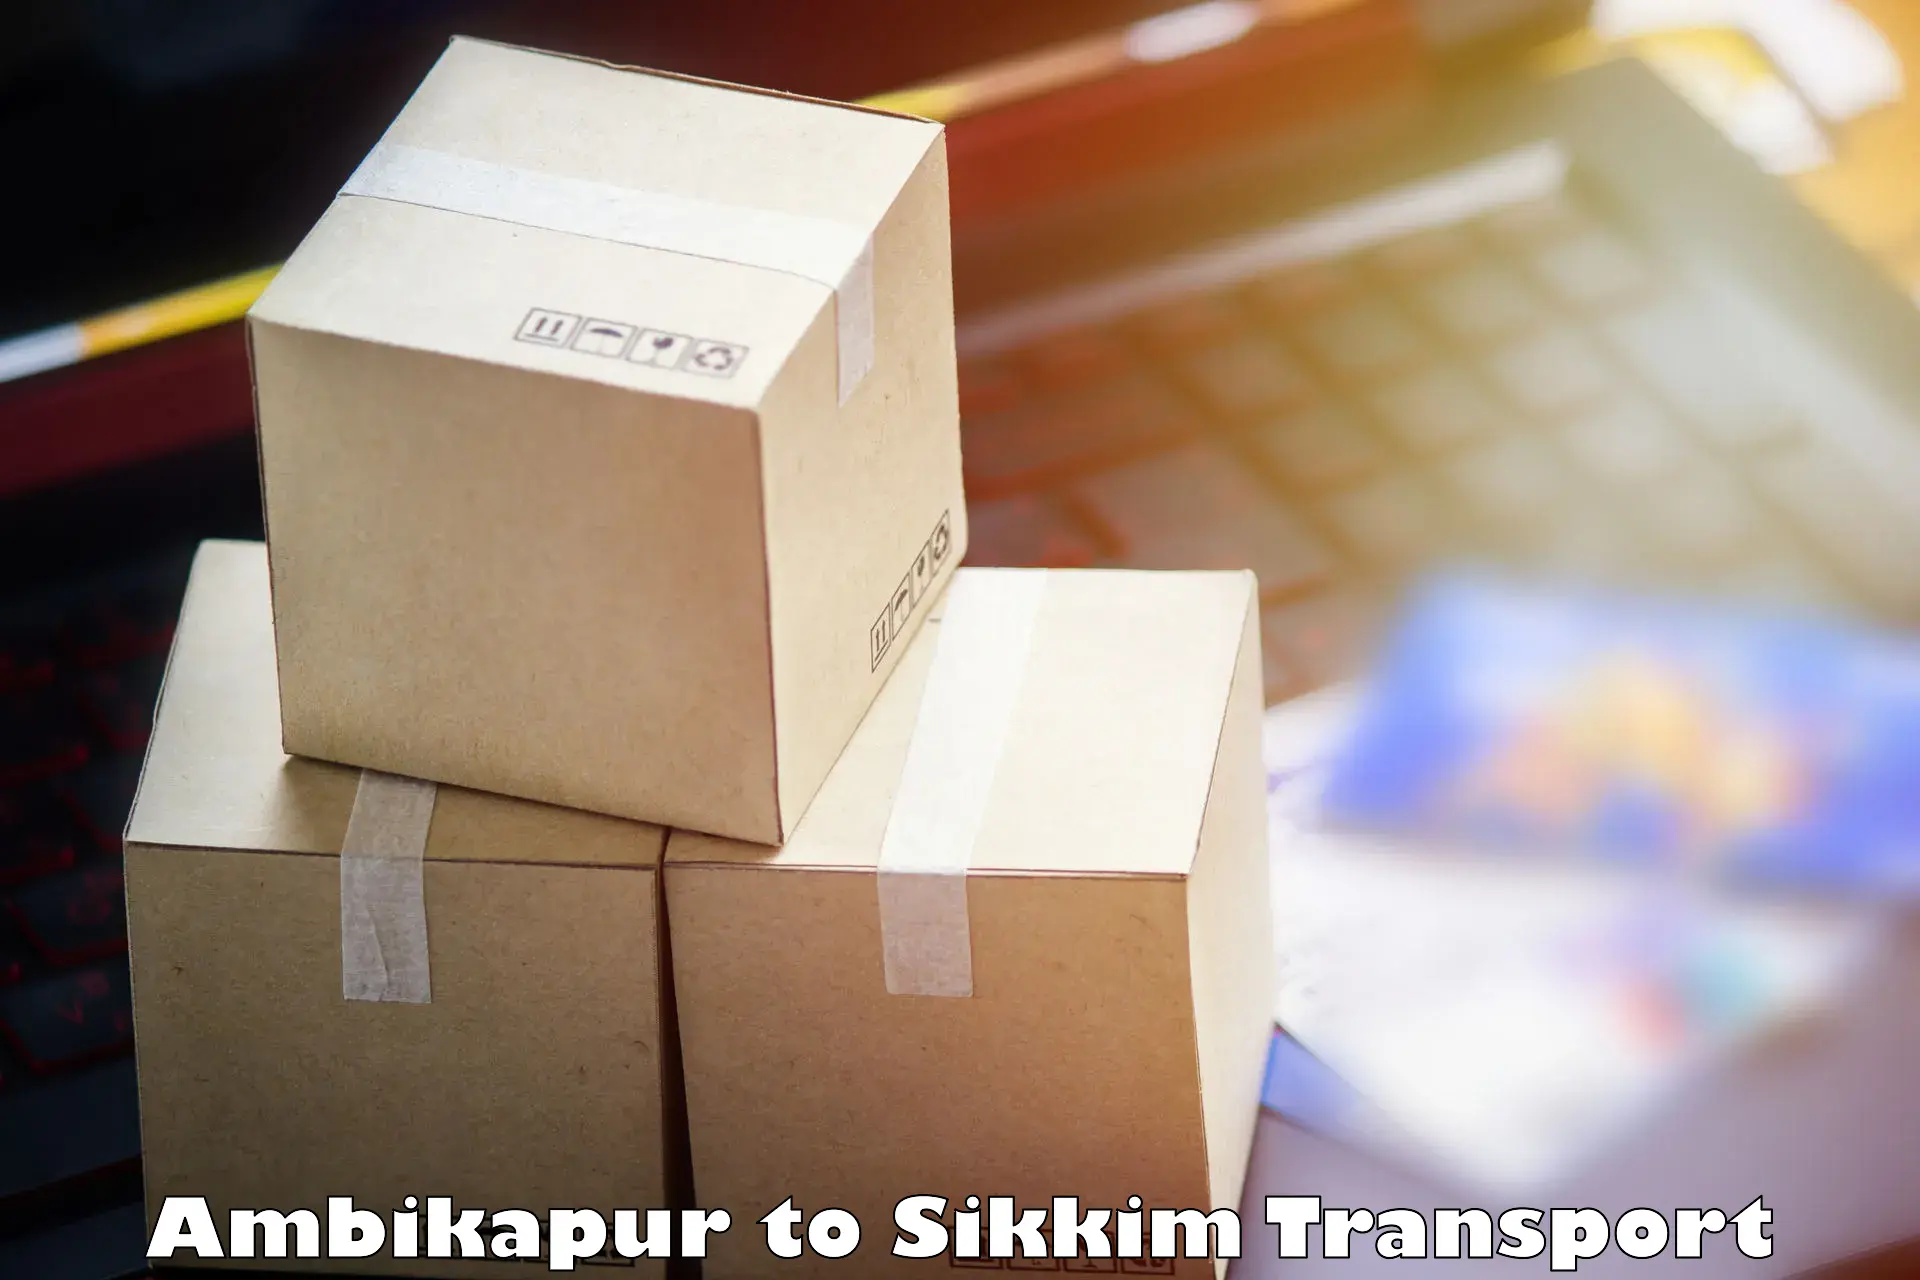 All India transport service Ambikapur to East Sikkim